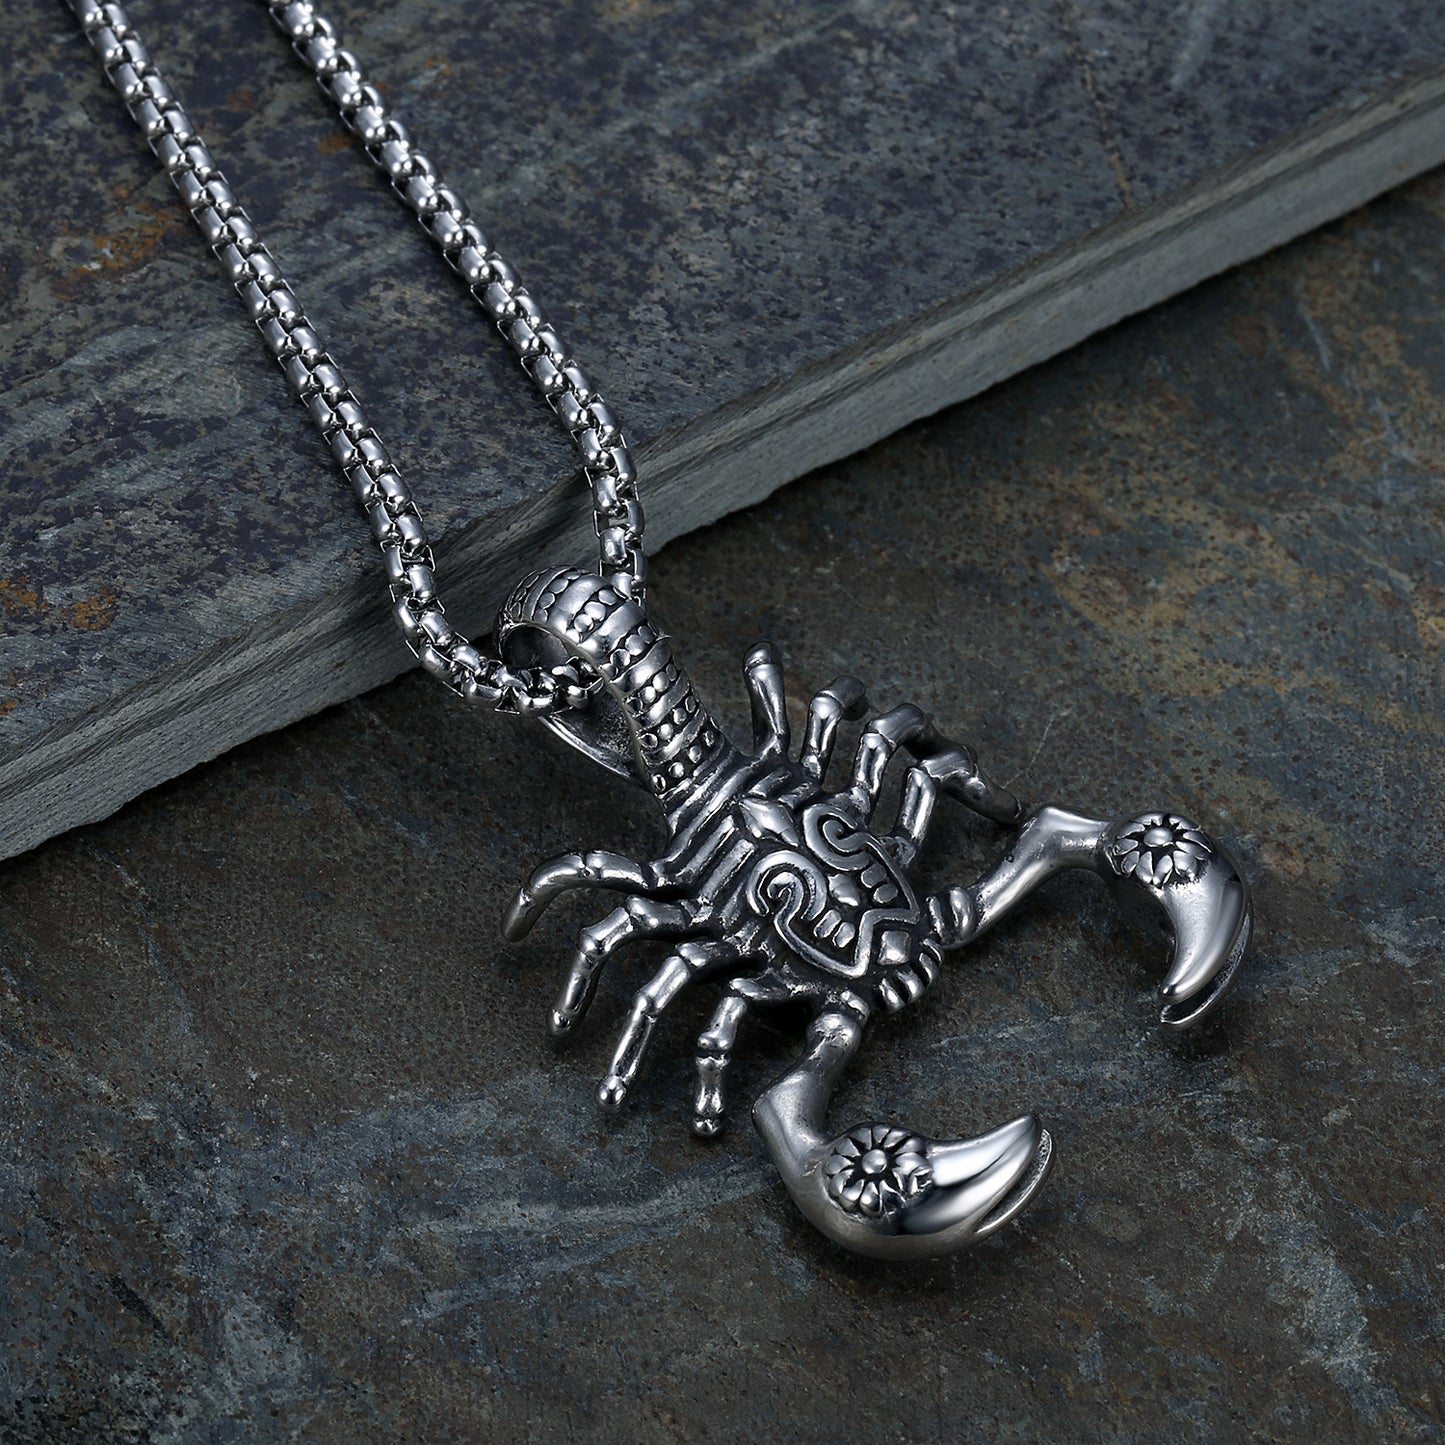 Gothic Vintage Stainless Steel Scorpion Pendant Necklace.